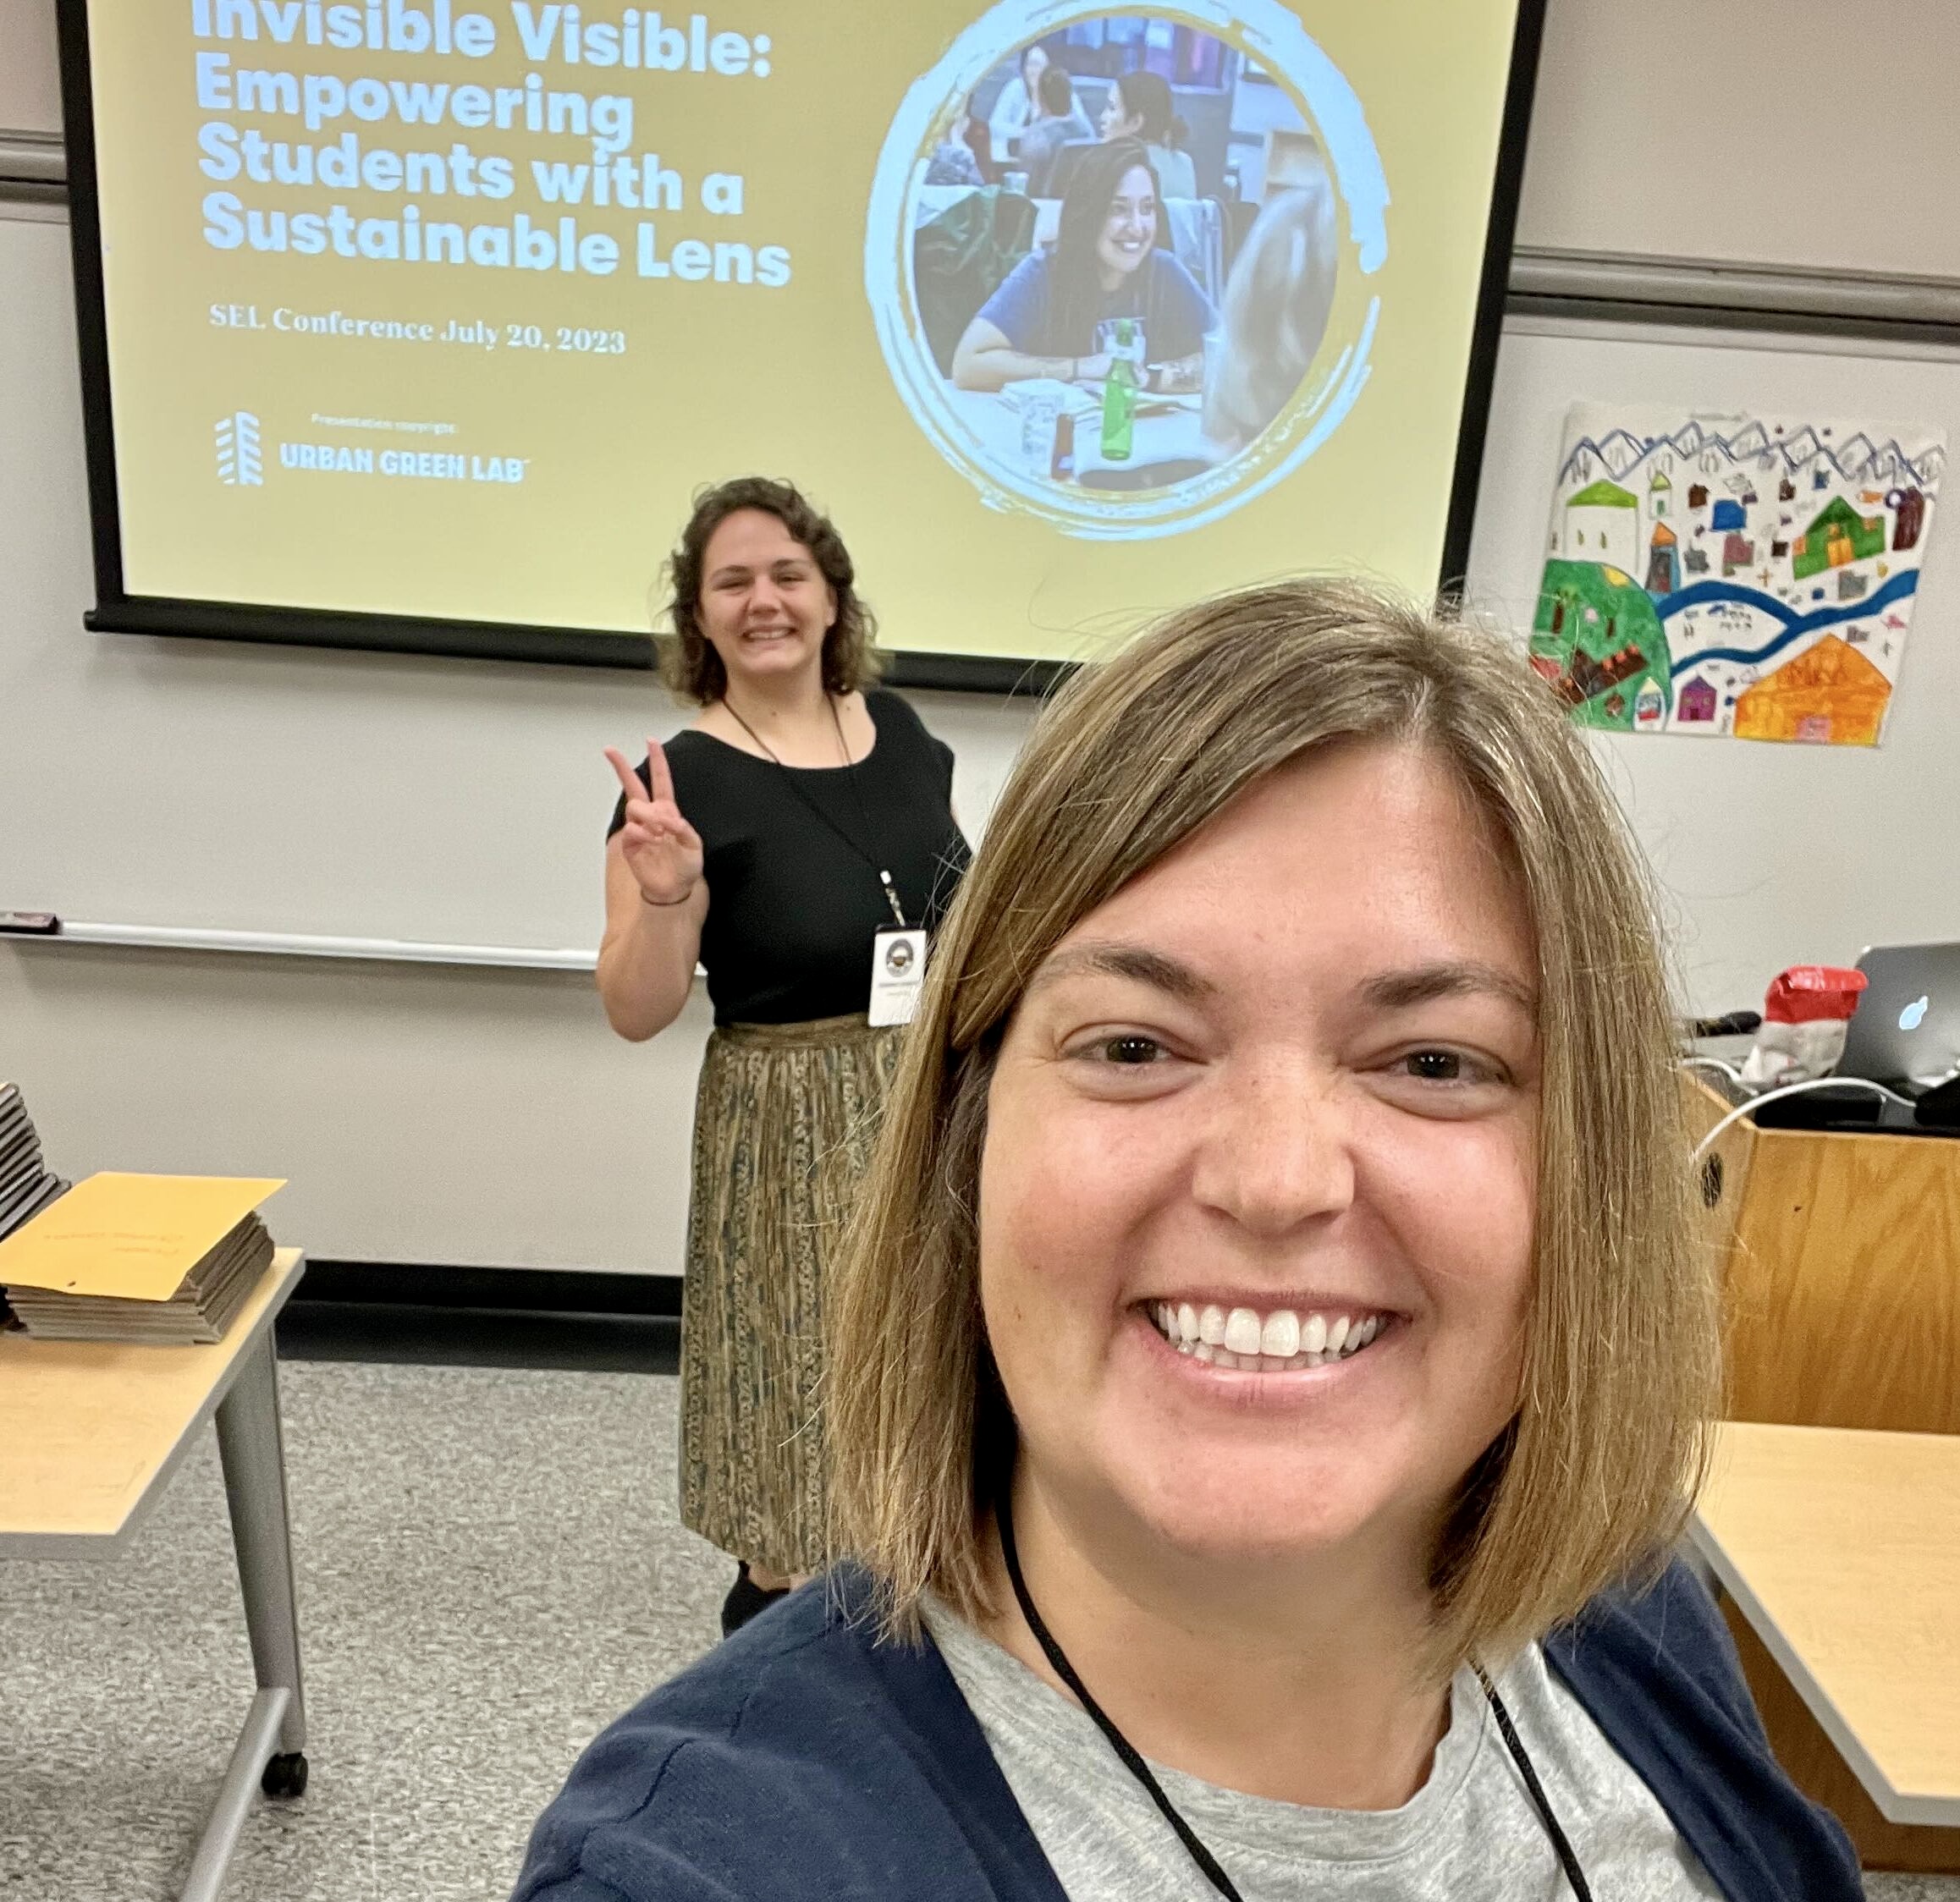 Two women take a selfie in front of a presentation in a classroom